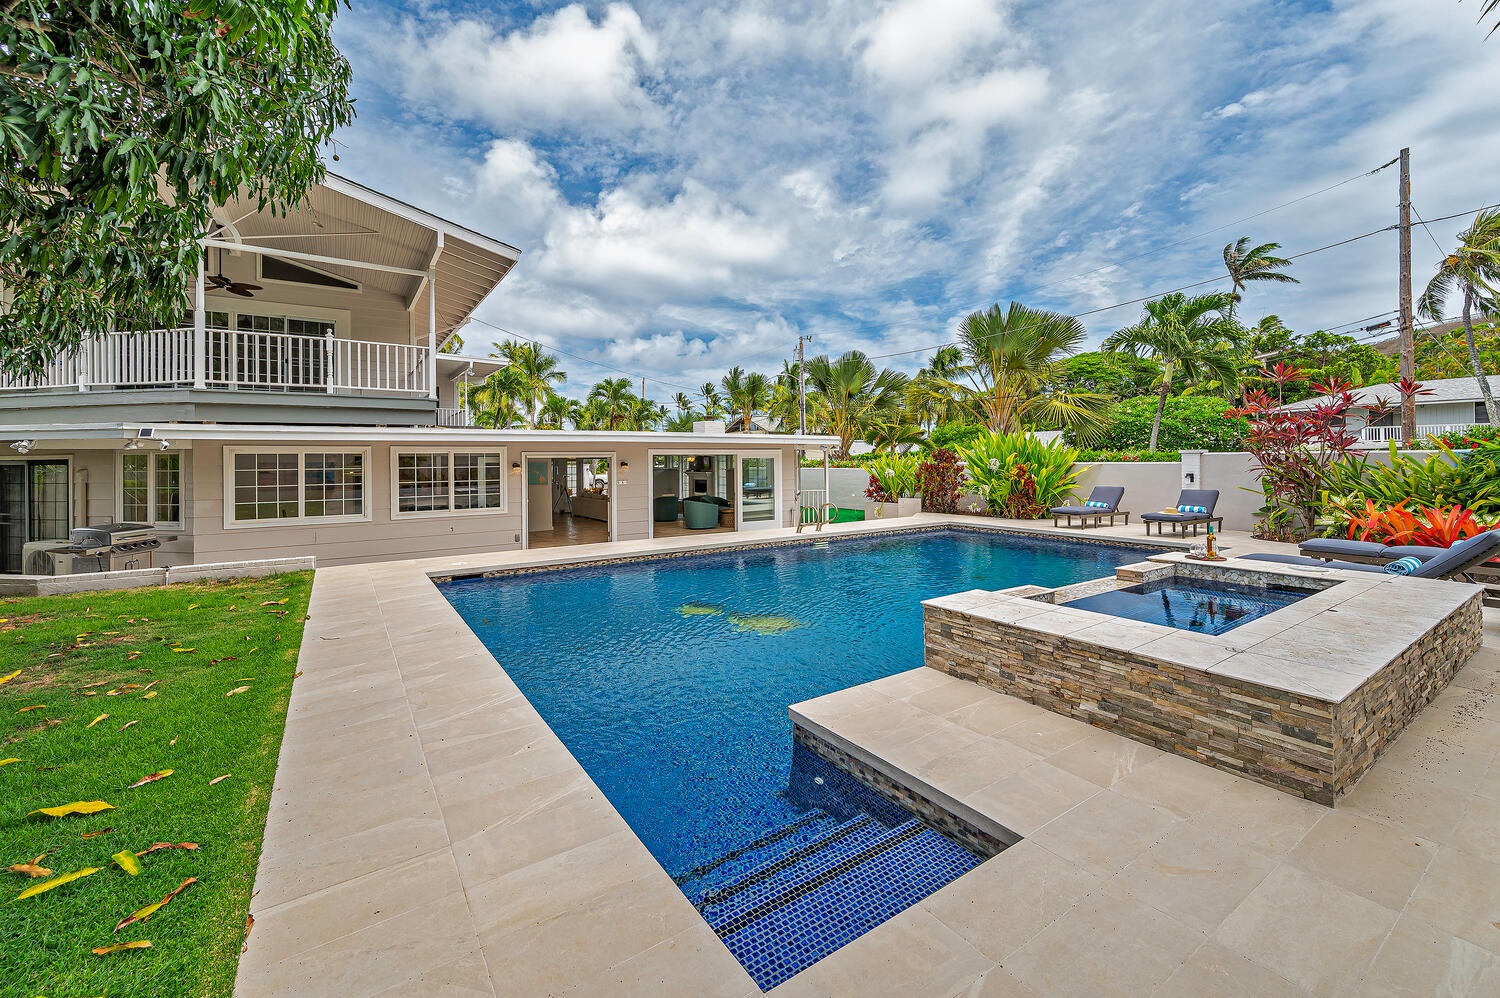 Kailua Vacation Rentals, Villa Hui Hou - Lush backyard with large pool deck and pool give you all the feels of having your own private mini hotel!  (Note: Upper pool area is apart of the pool and NOT a spa)